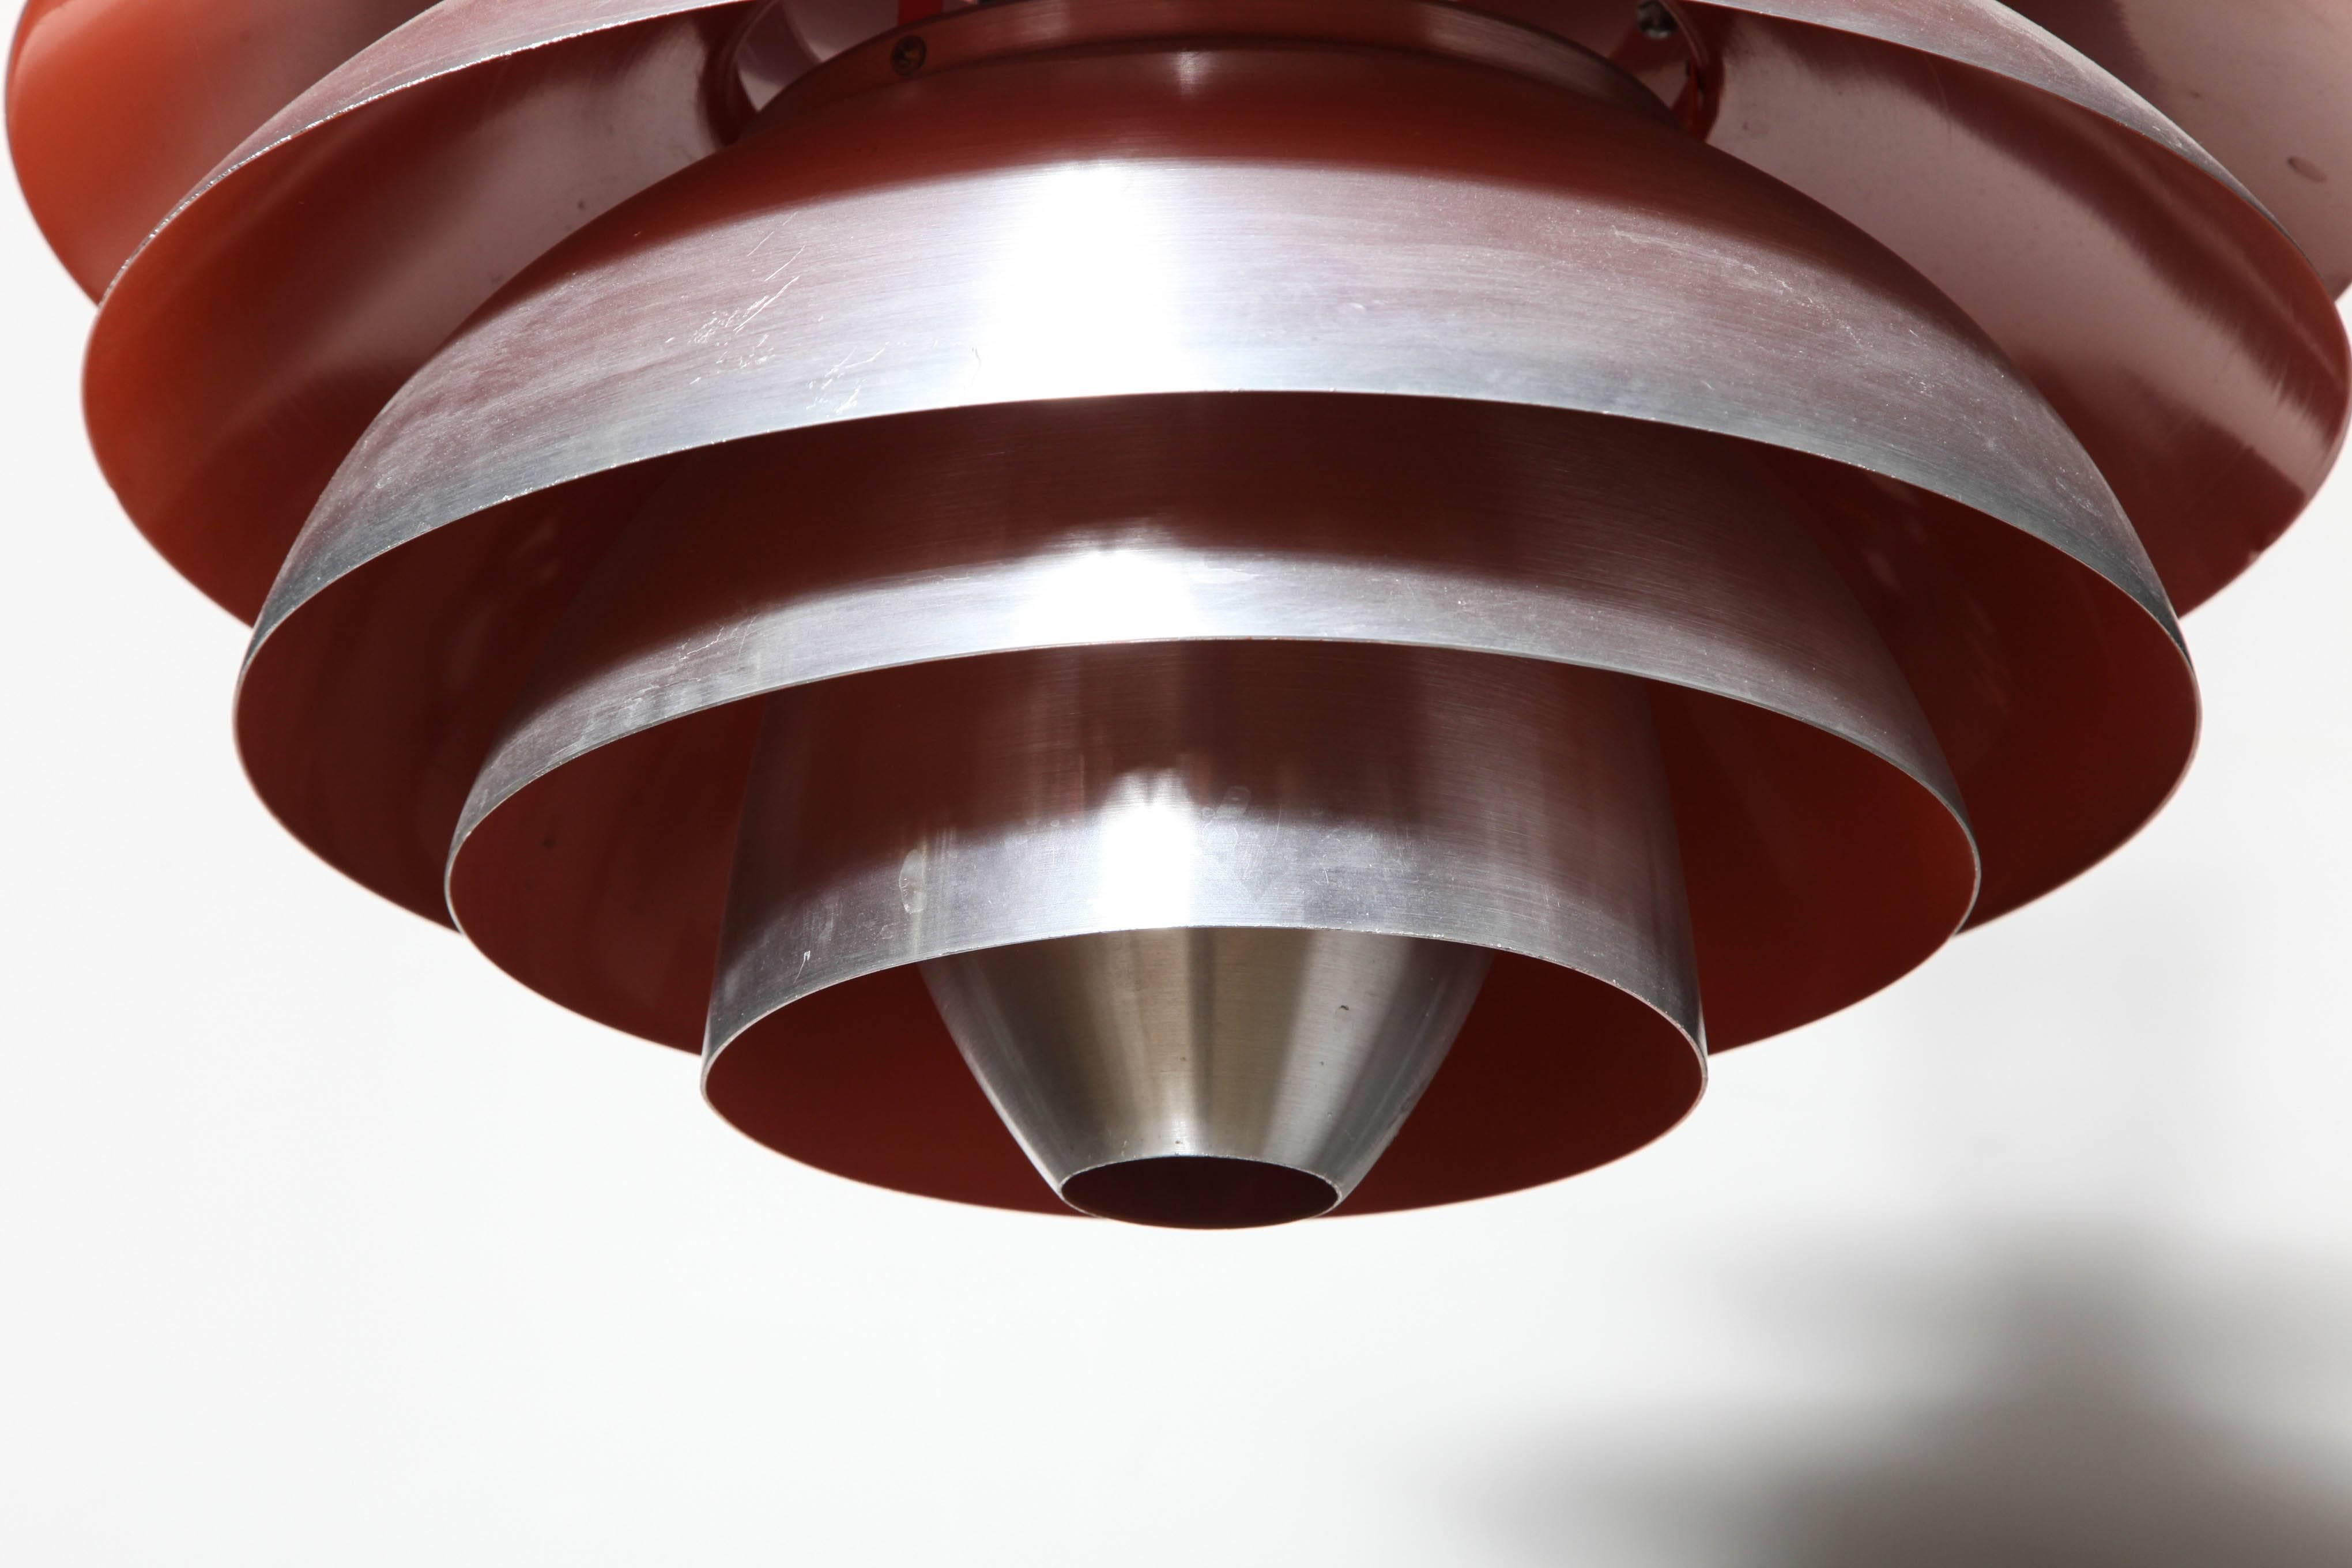 Danish Modern Poul Henningsen for Louis Poulsen PH Louvre Brushed Aluminum Hanging Lamp. Featuring an oval form with nine reflective Brushed Aluminum concentric bands and Warm Red toned Orange enameled interior. Complimentary warm light.  Adjustable